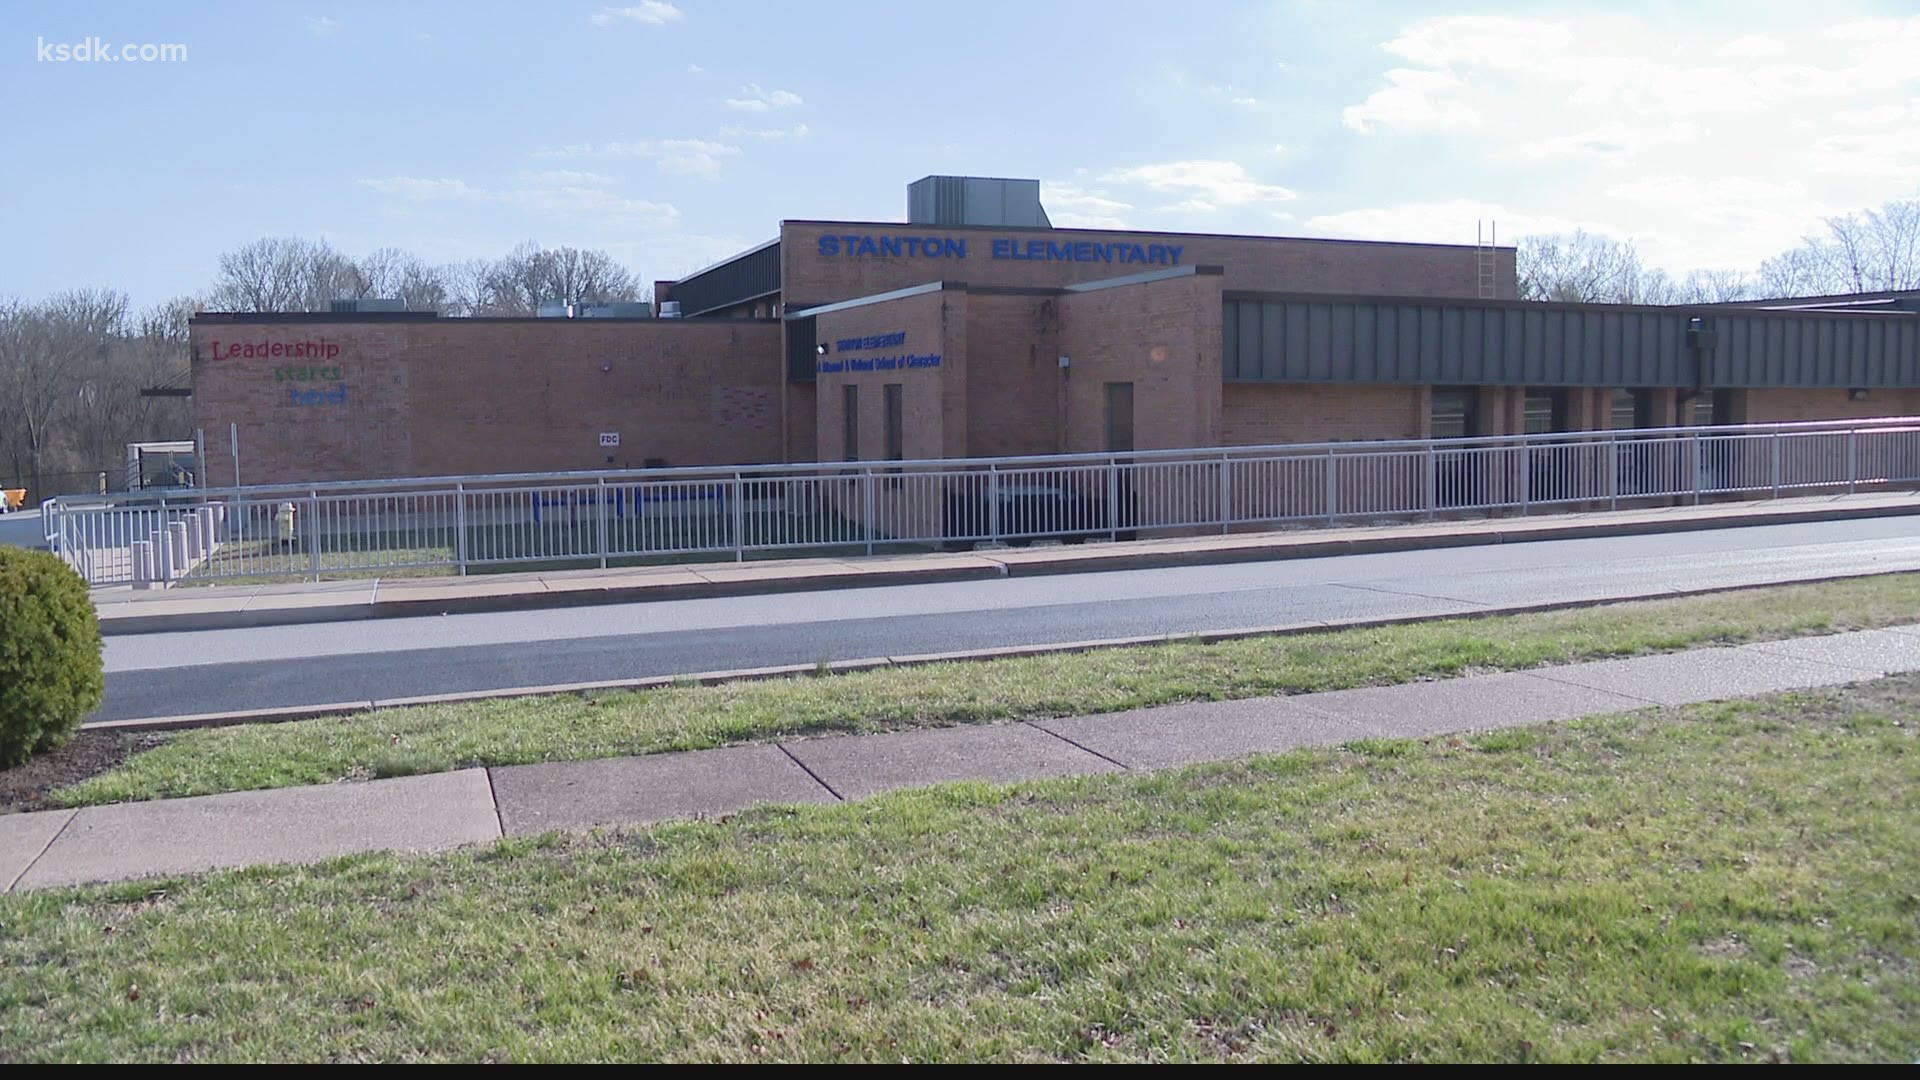 Investigators told the Rockwood School District that there was no indication that any students in the district were victimized